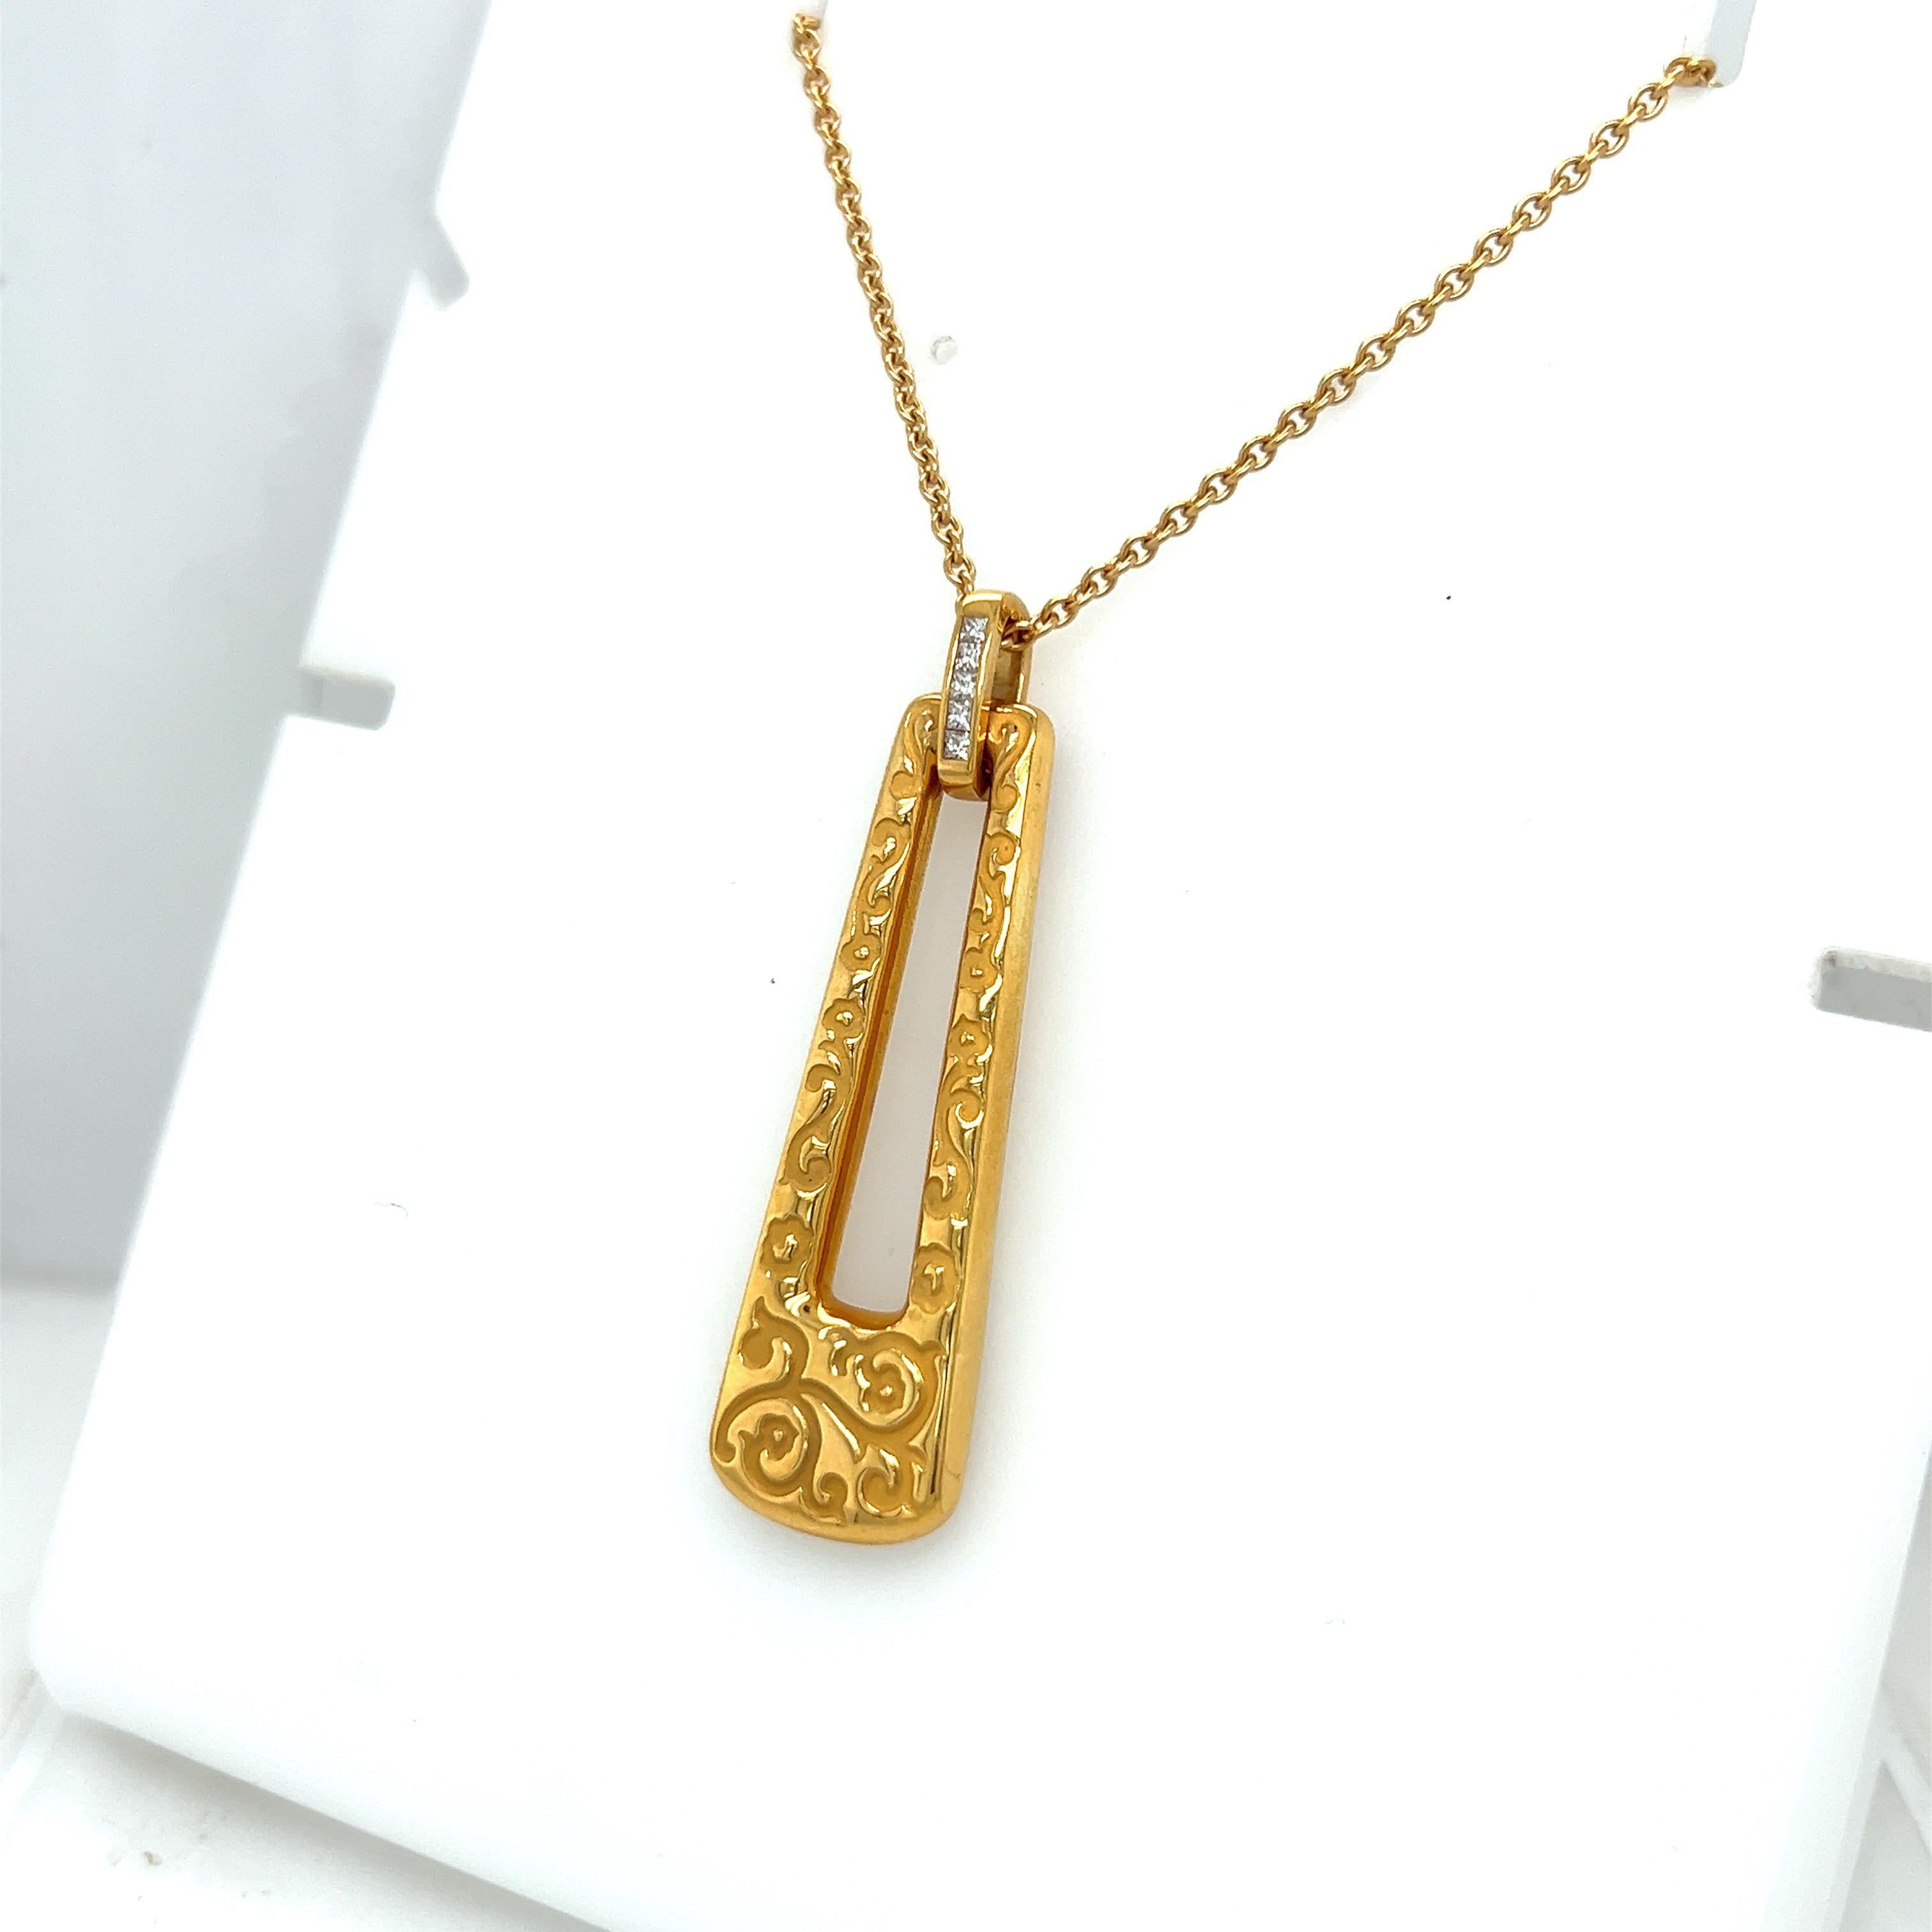 Carrera Y Carrera has built its its famous name on figurative designs, an obsession with surface finishes, and a compelling way of seeing beauty in art and nature.
This 18 karat yellow gold pendant is the perfect example of Carrera's iconic work. An